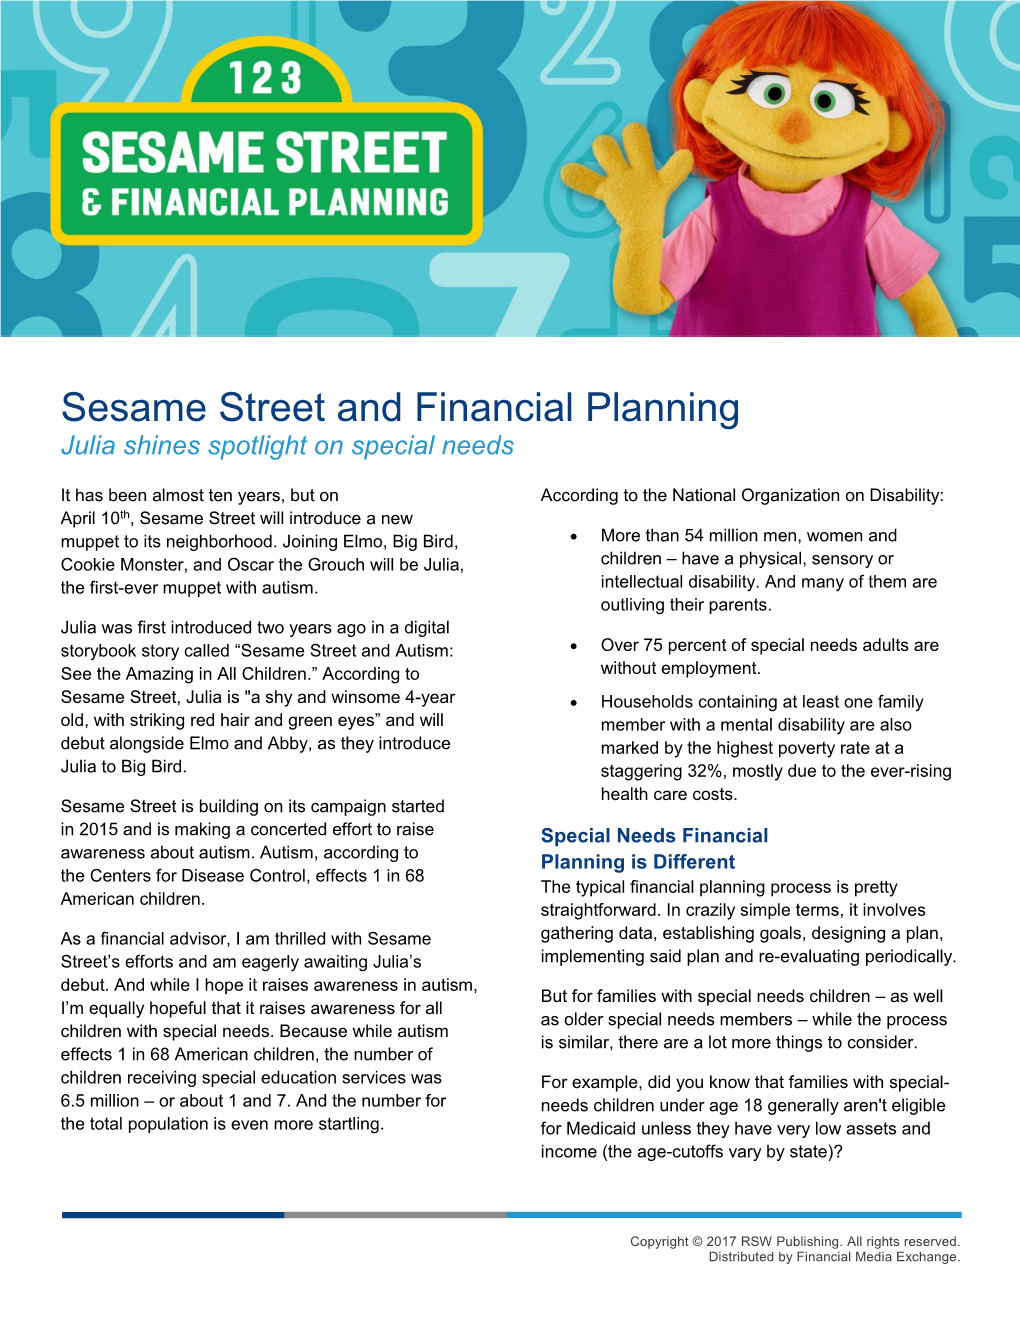 Sesame Street and Financial Planning Julia Shines Spotlight on Special Needs